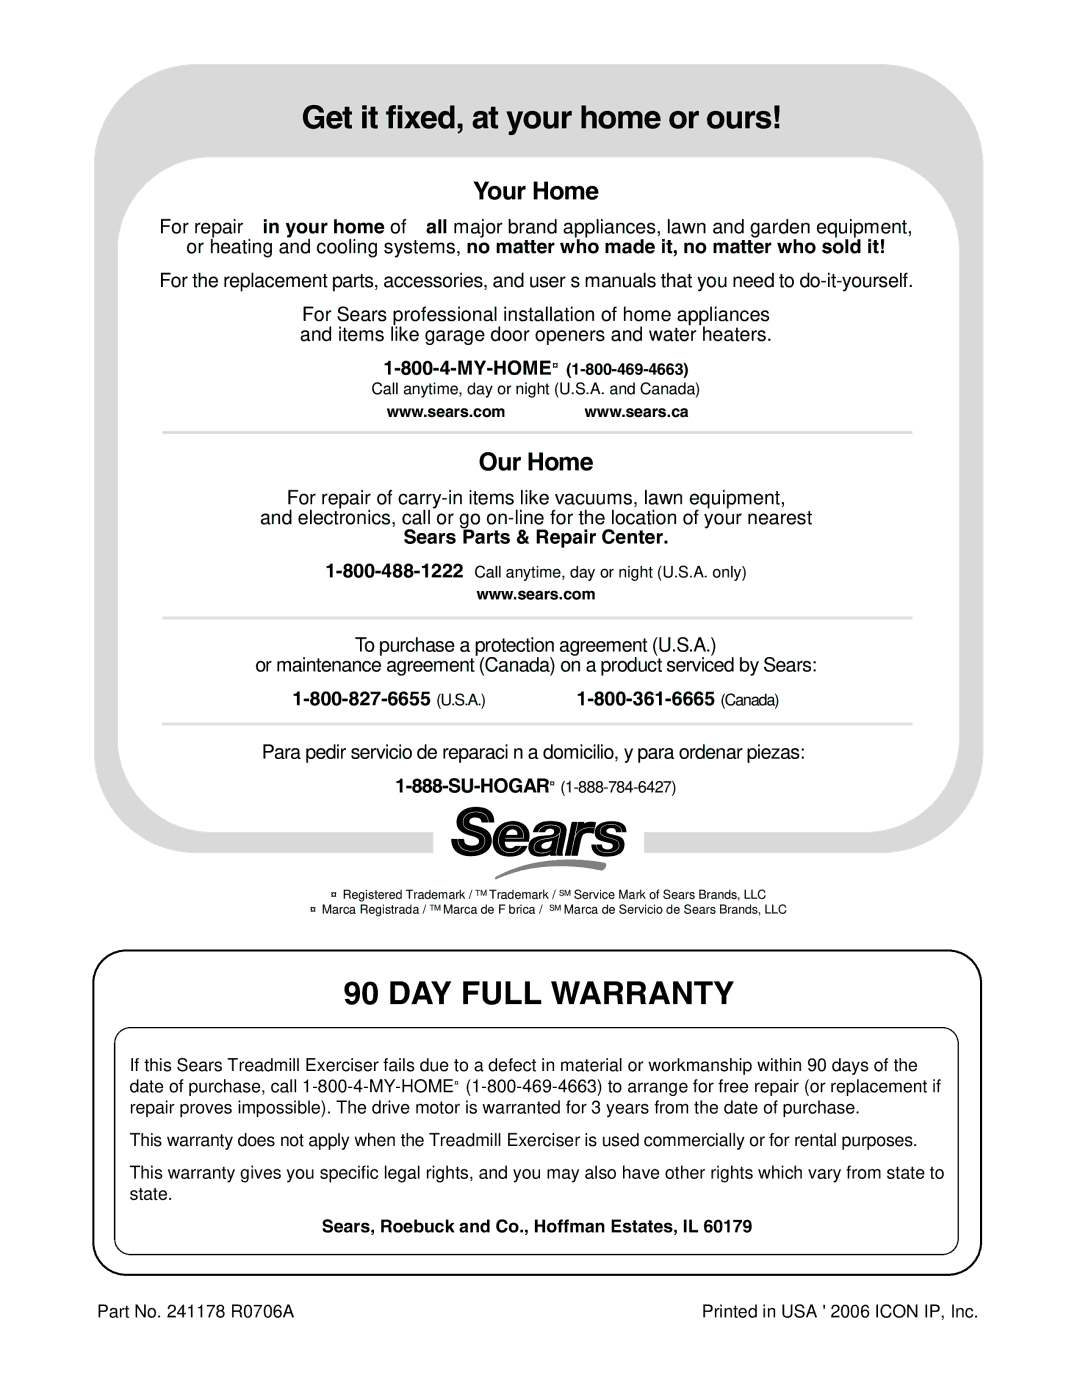 ProForm 831.24623.0 user manual DAY Full Warranty, Sears, Roebuck and Co., Hoffman Estates, IL 